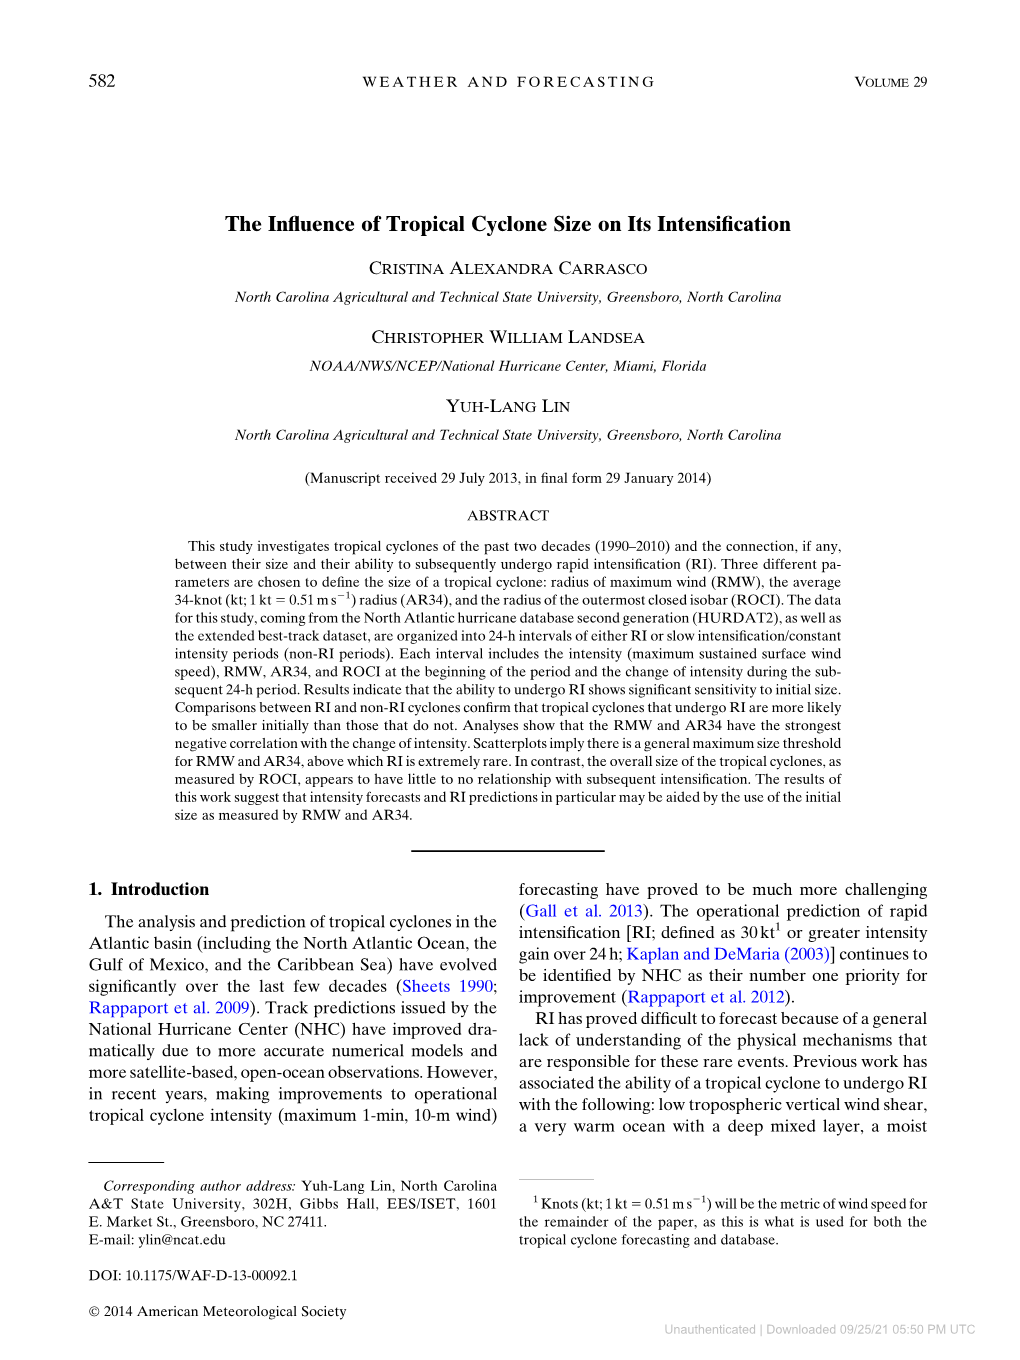 The Influence of Tropical Cyclone Size on Its Intensification